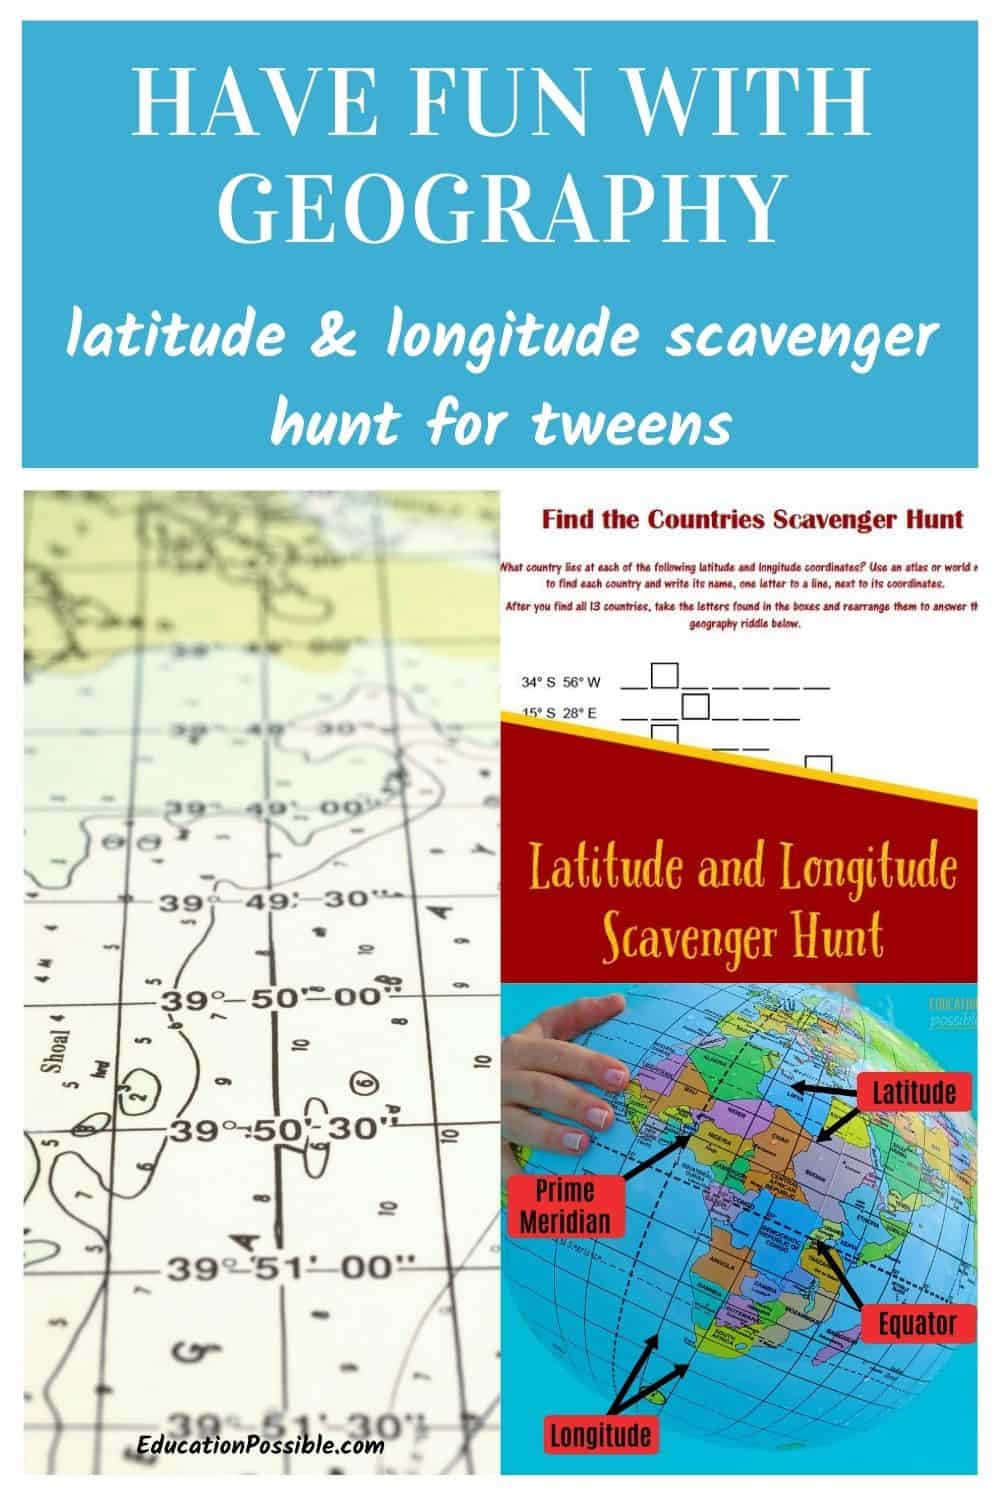 Three images for teaching kids latitude and longitude. Map coordinates, a map beach ball, and a scavenger hunt